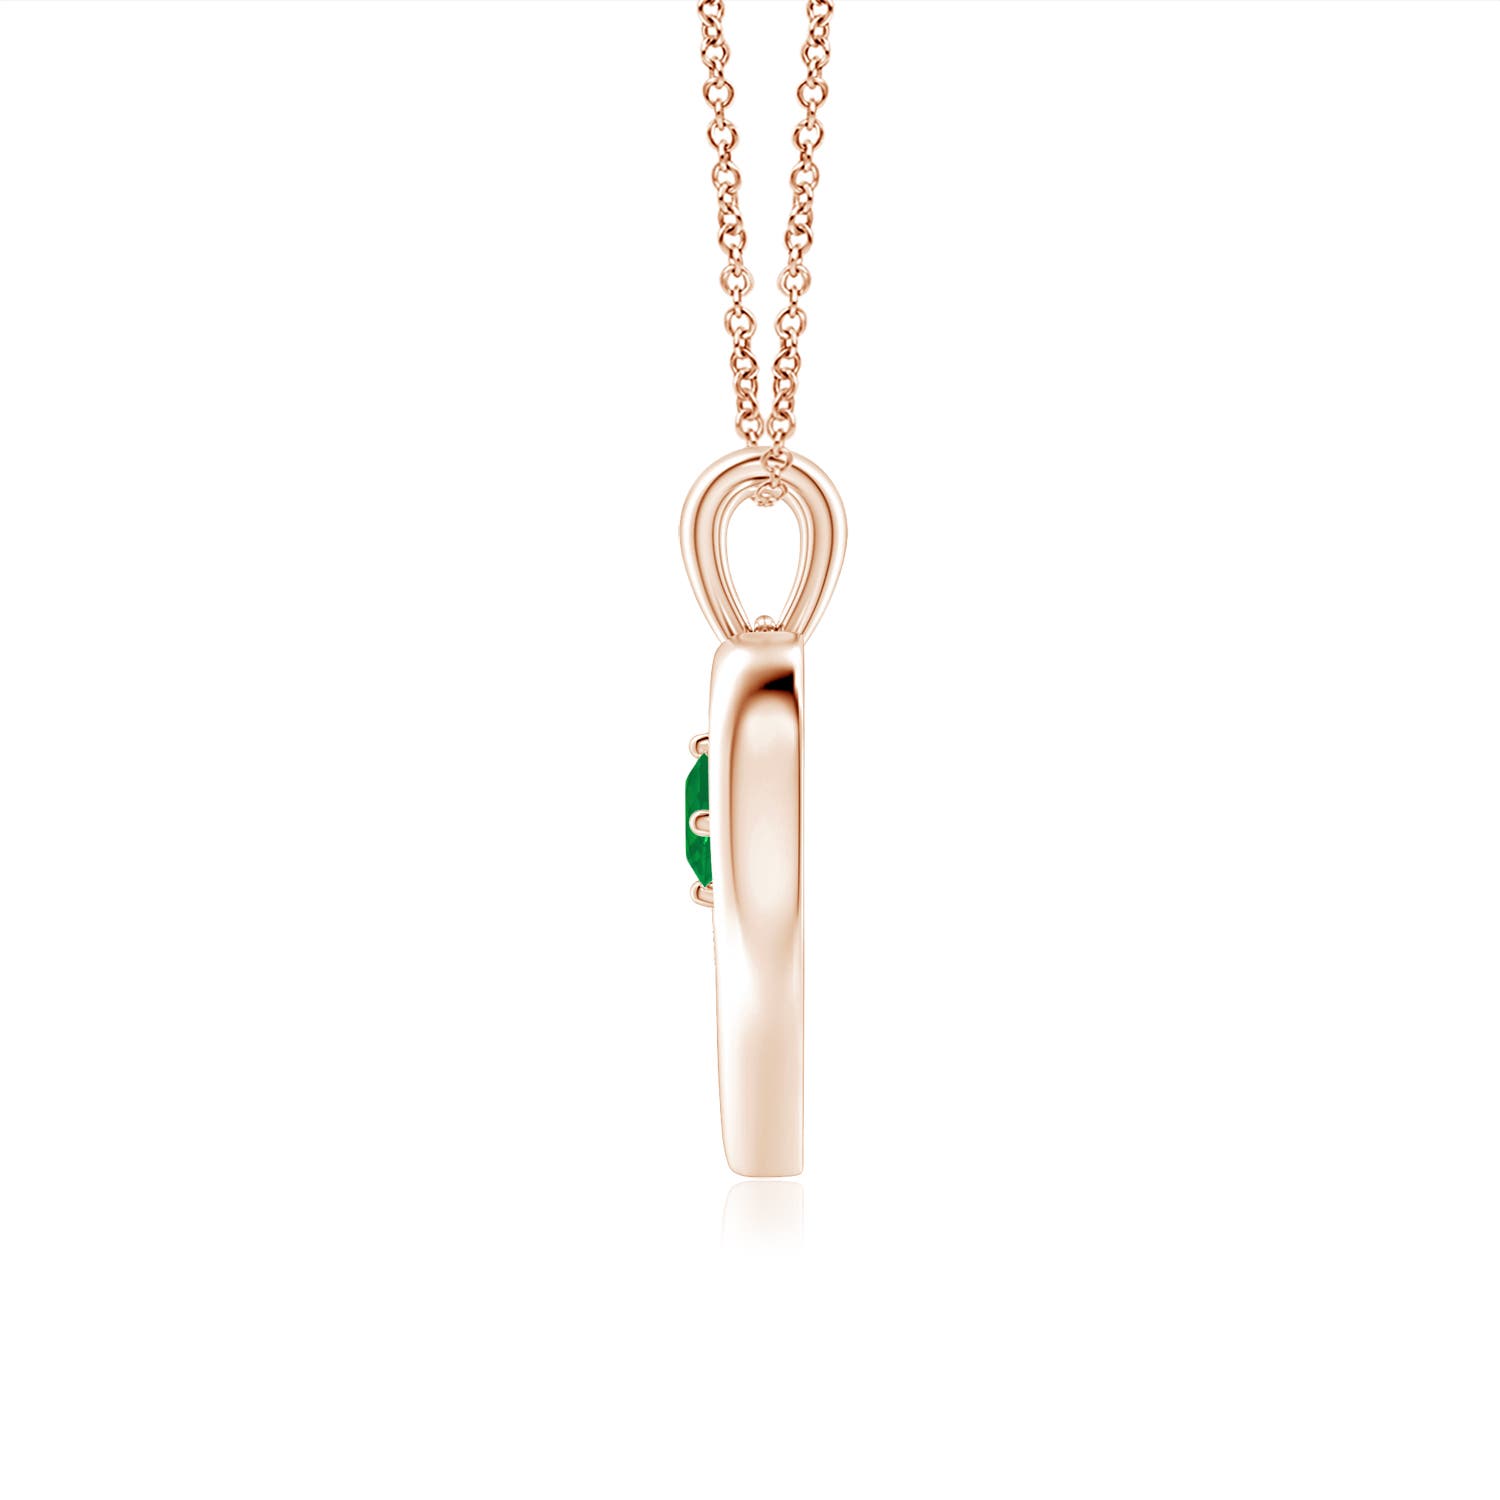 AA - Emerald / 0.1 CT / 14 KT Rose Gold